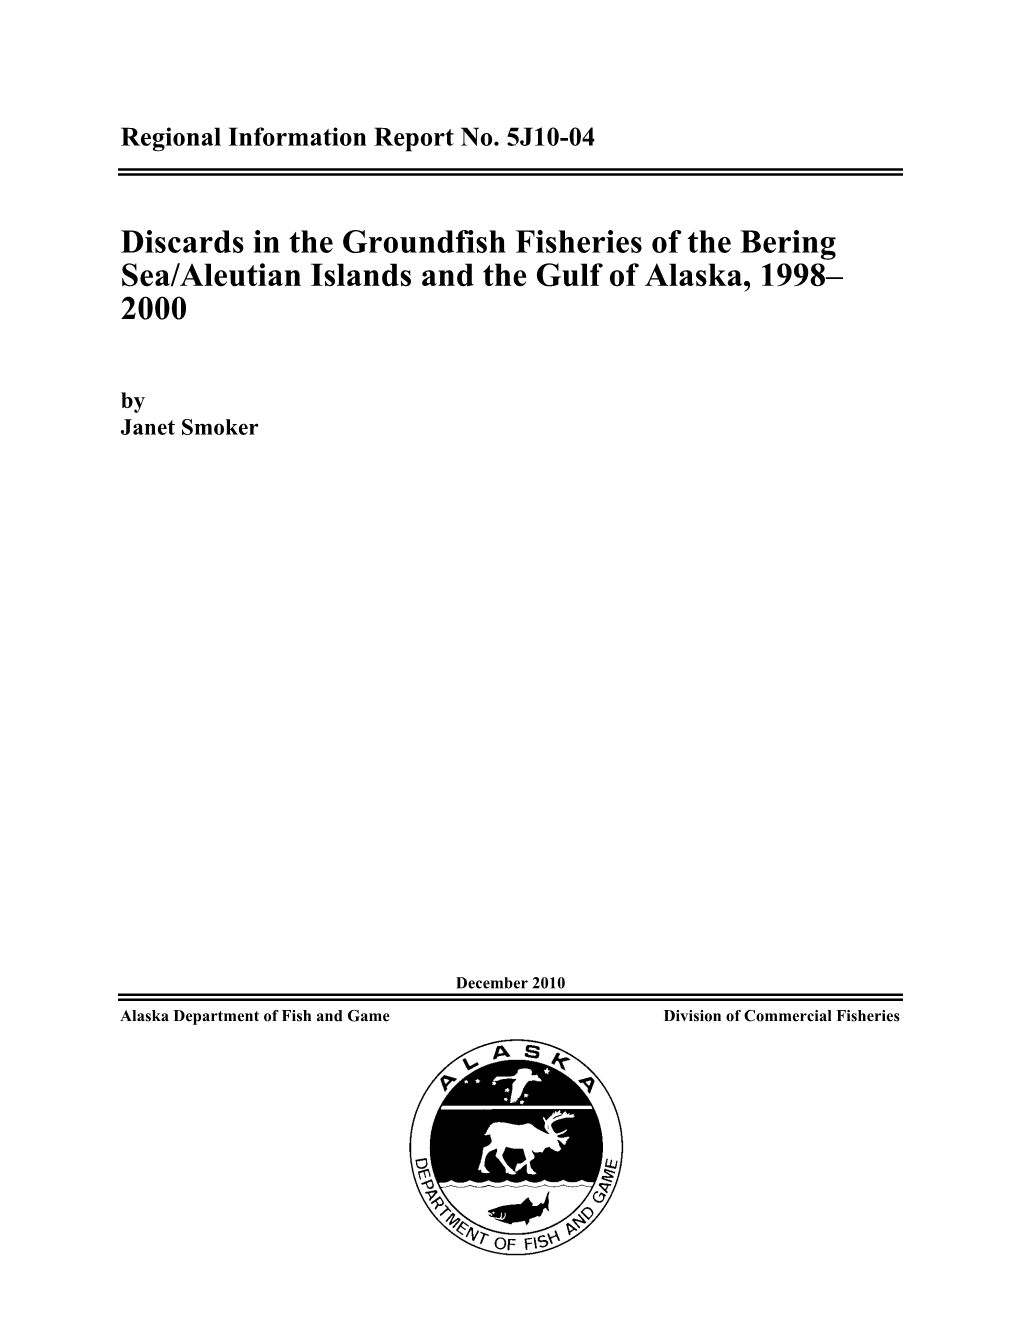 Comprehensive Discards in the Groundfish Fisheries of the Bering Sea/Aleutian Islands and the Gulf of Alaska, 1998–2000